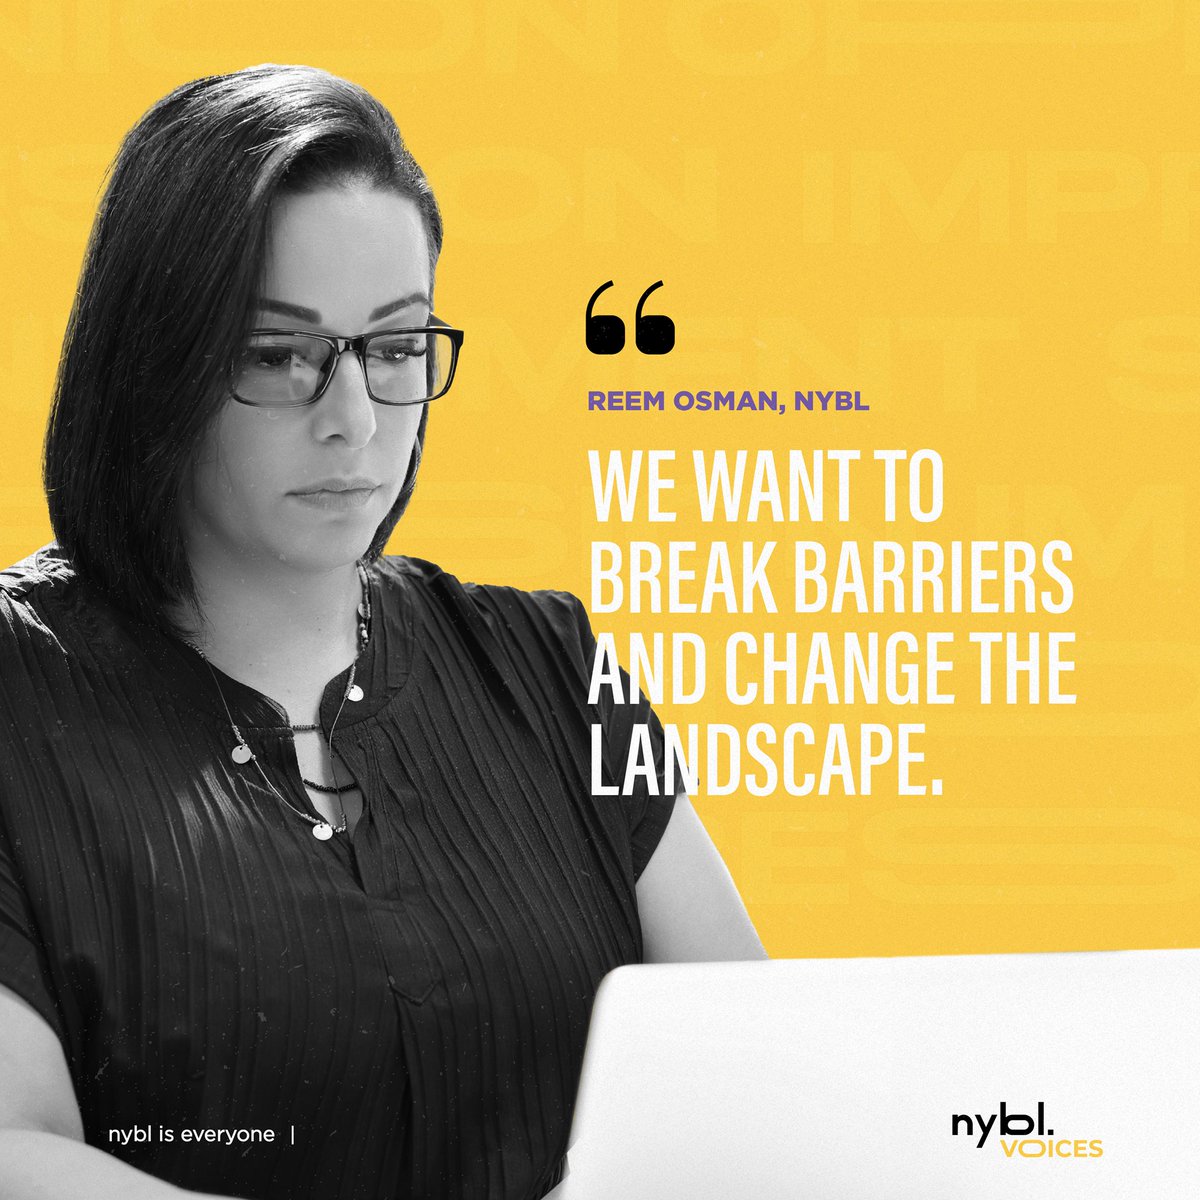 nybl’s Chief People Officer, Reem Osman’s words on the philosophy of nybl’s founders. Join us in embracing a #culture that prioritizes efficiency over rigid time constraints.💜 Listen to this episode of nybl Voices here: eu1.hubs.ly/H091fDb0 #AI #UAE #KSA